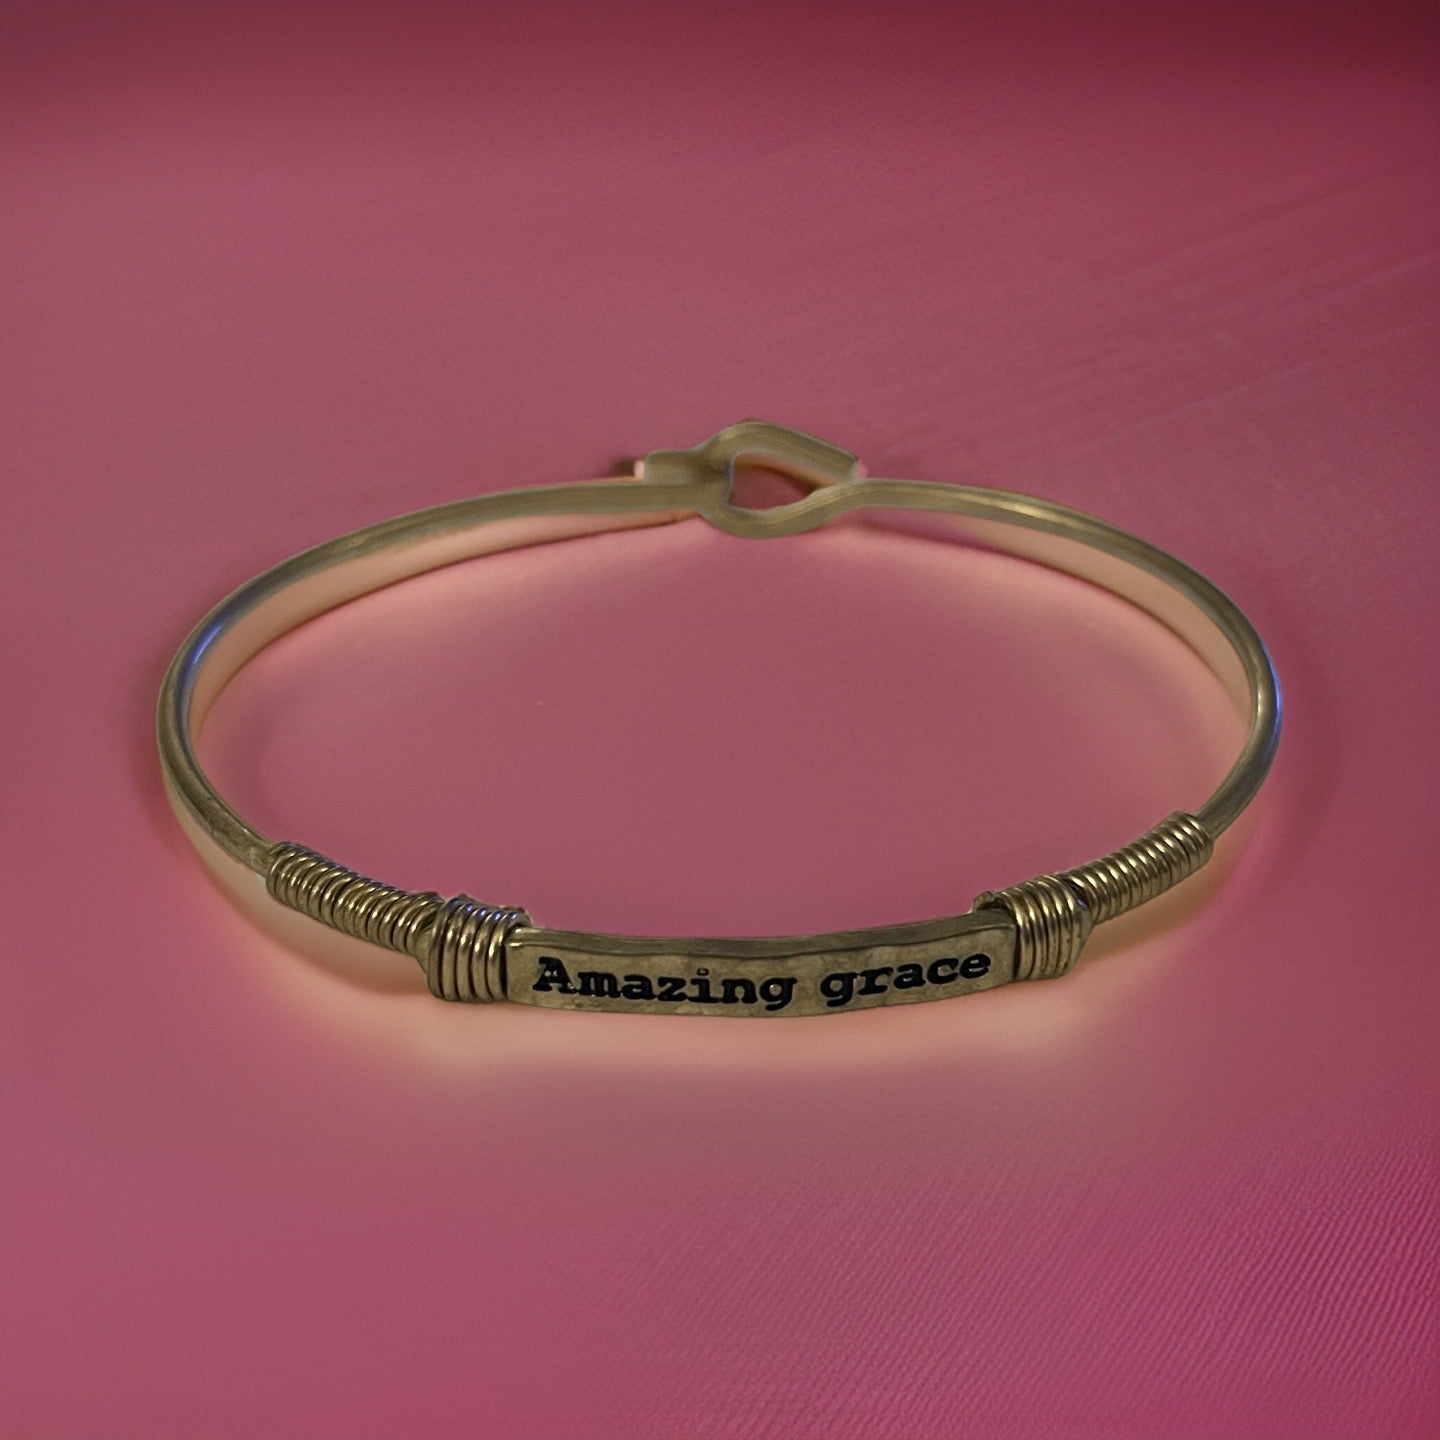 Bracelet with engraved message, "Amazing Grace”. Available in gold and silver